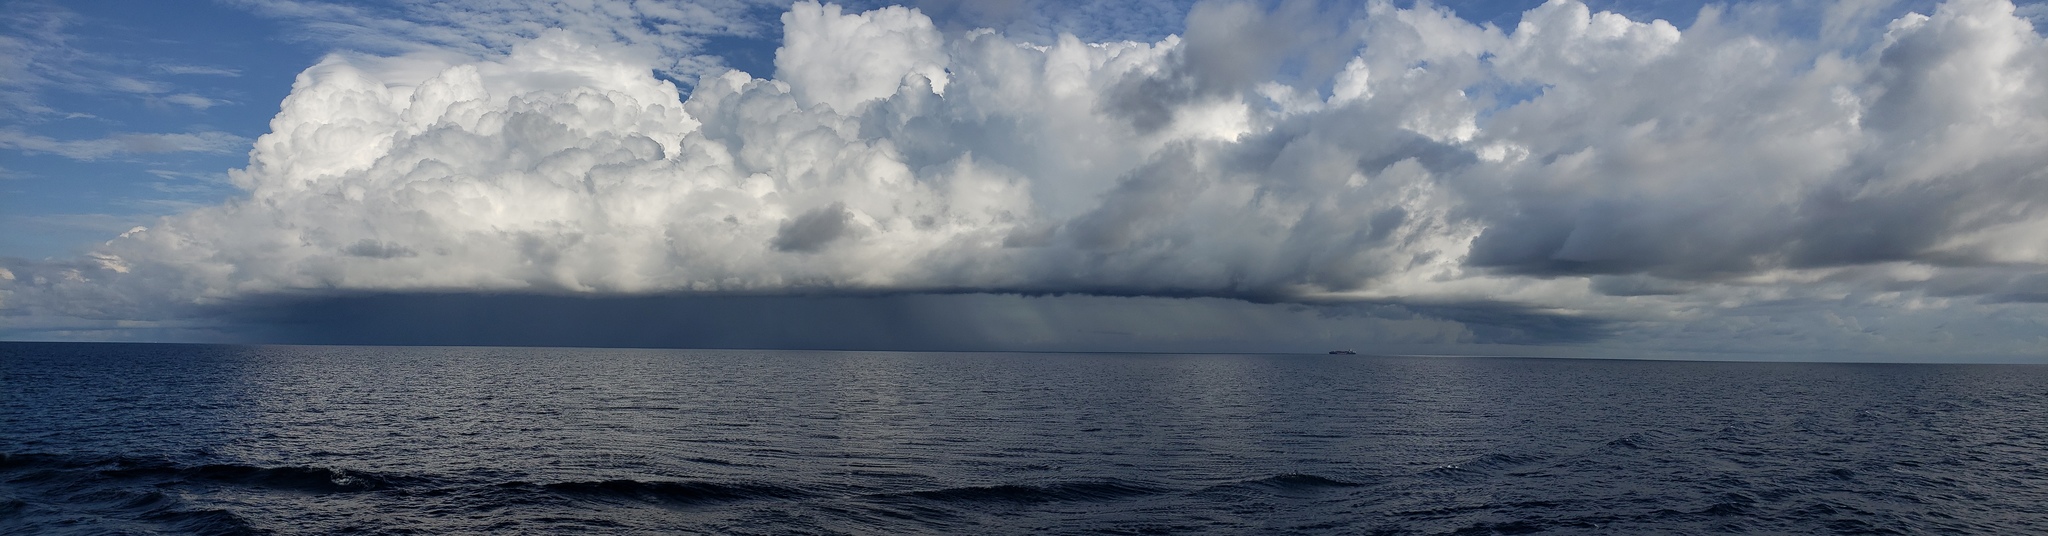 Cloud over the sea. South China Sea - My, Clouds, Mobile photography, Sea, Sailors